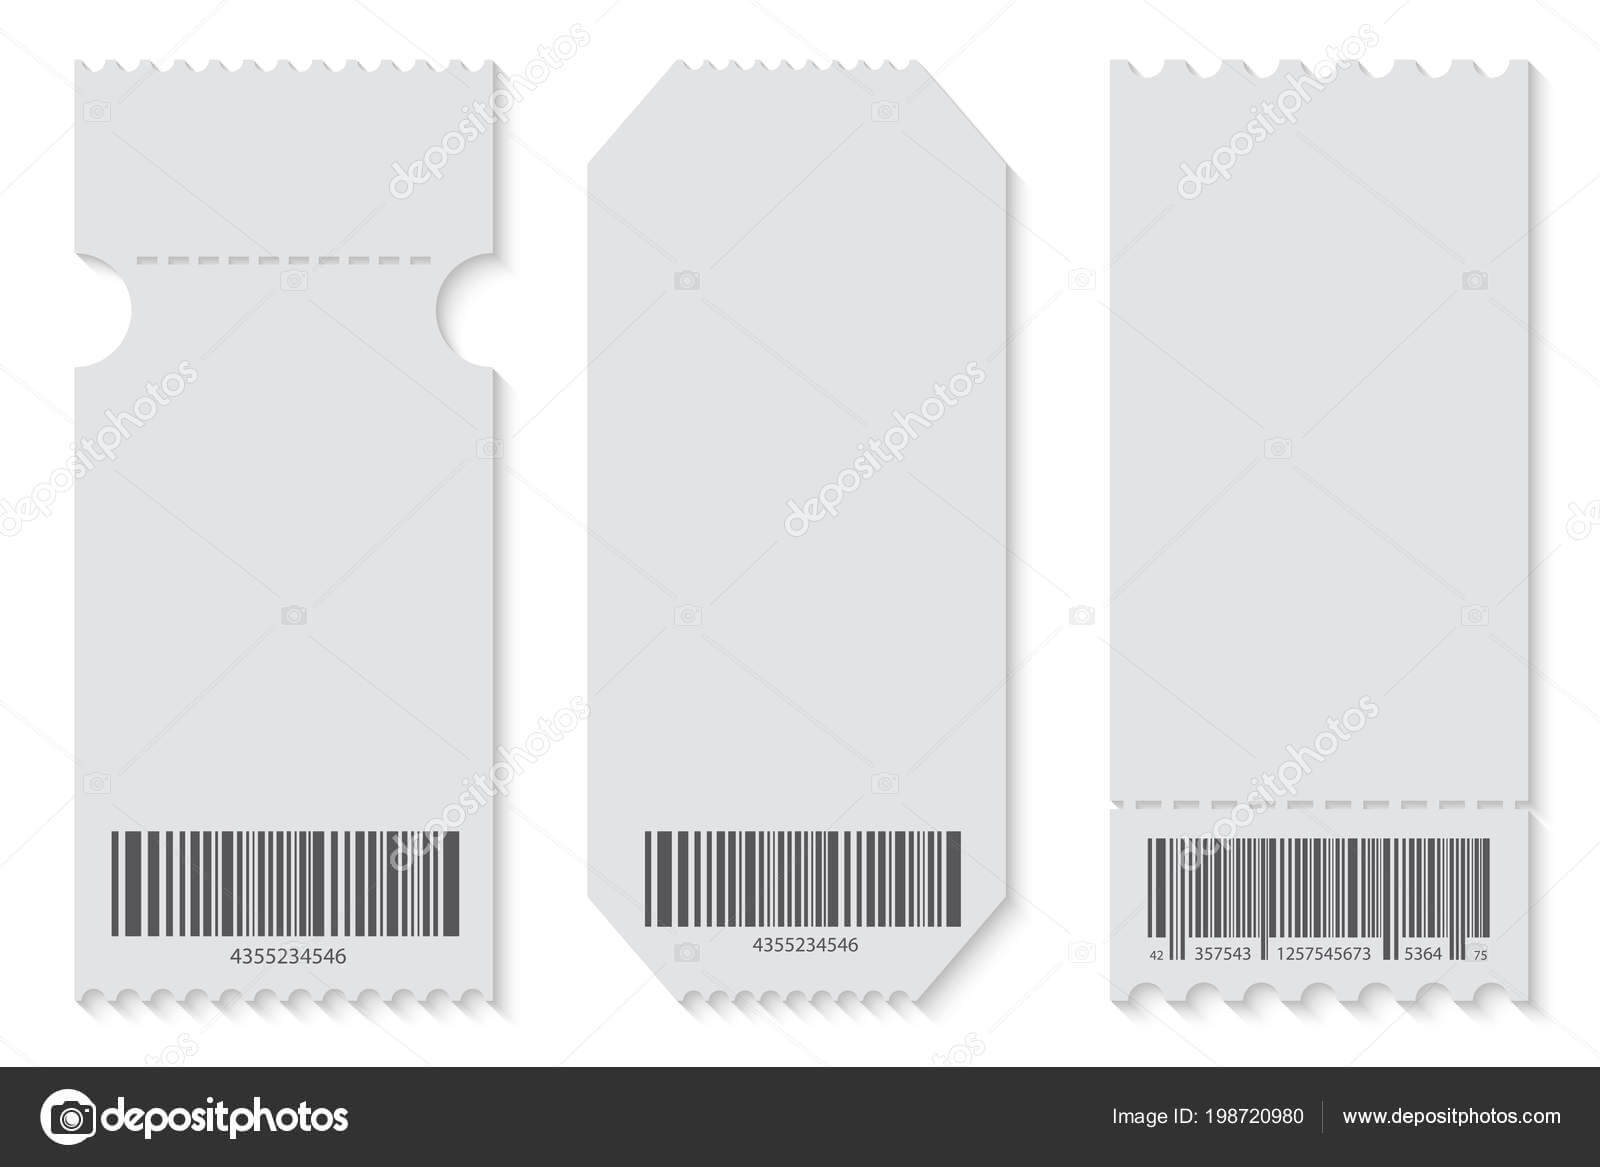 Creative Vector Illustration Of Empty Ticket Template Mockup Pertaining To Blank Train Ticket Template